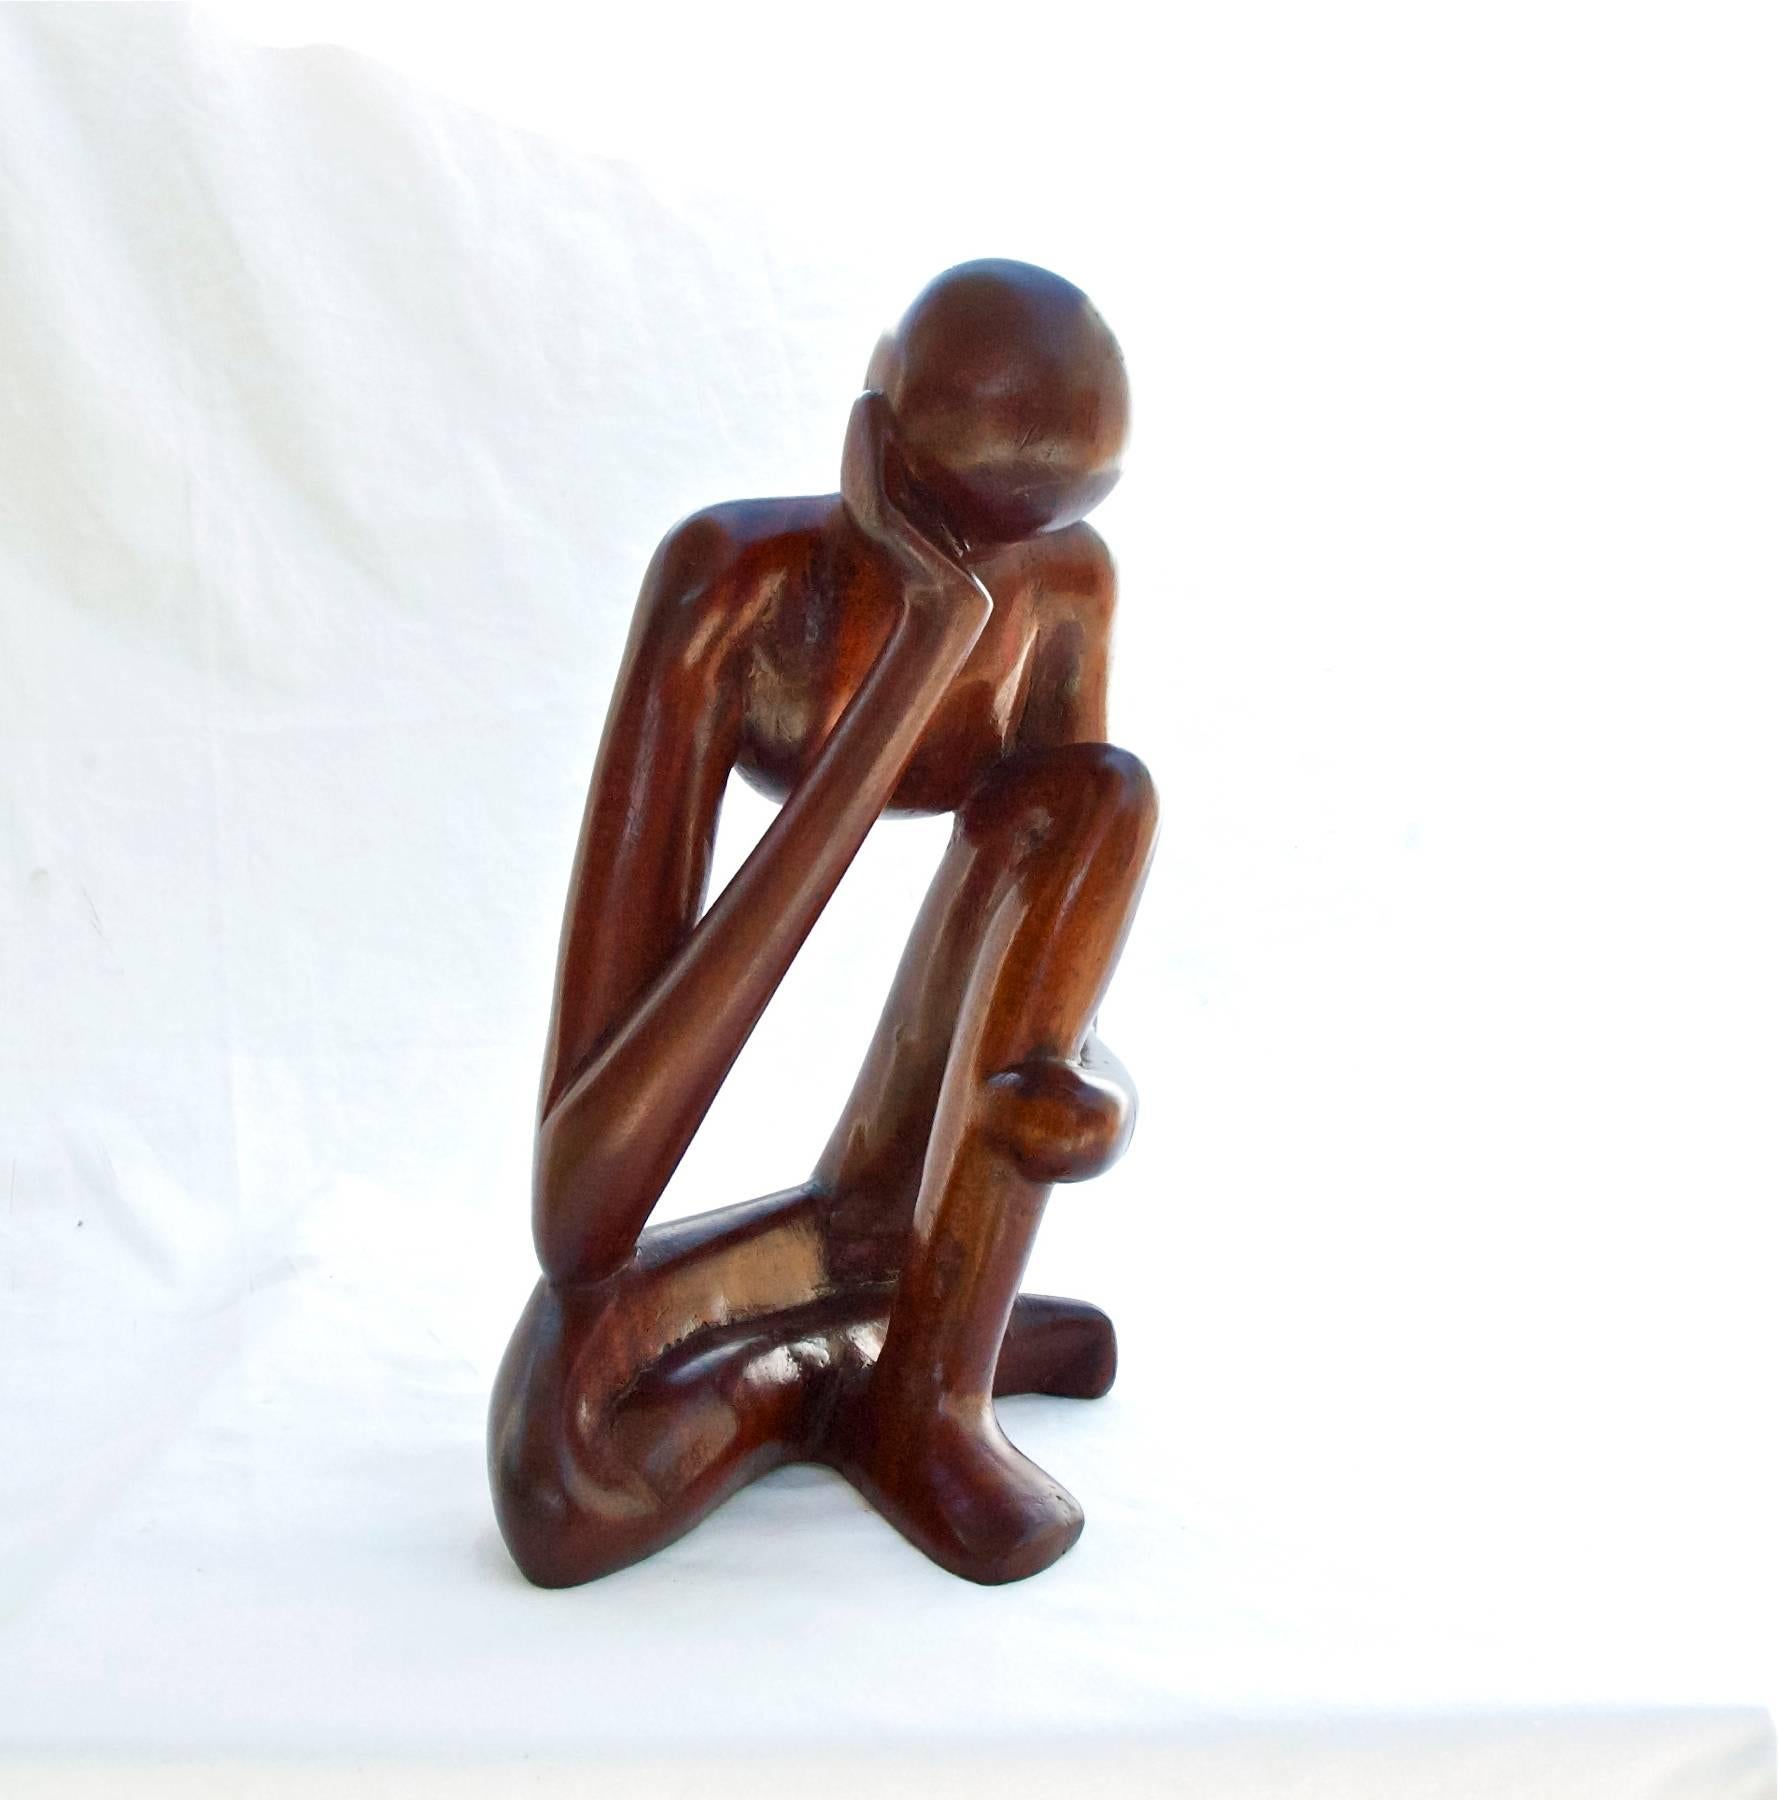 Modernist sculpture hand-carved and worked of mahogany. The figure sits in contemplation with head slightly bowed, suggestive of an existential crisis. Unsigned.